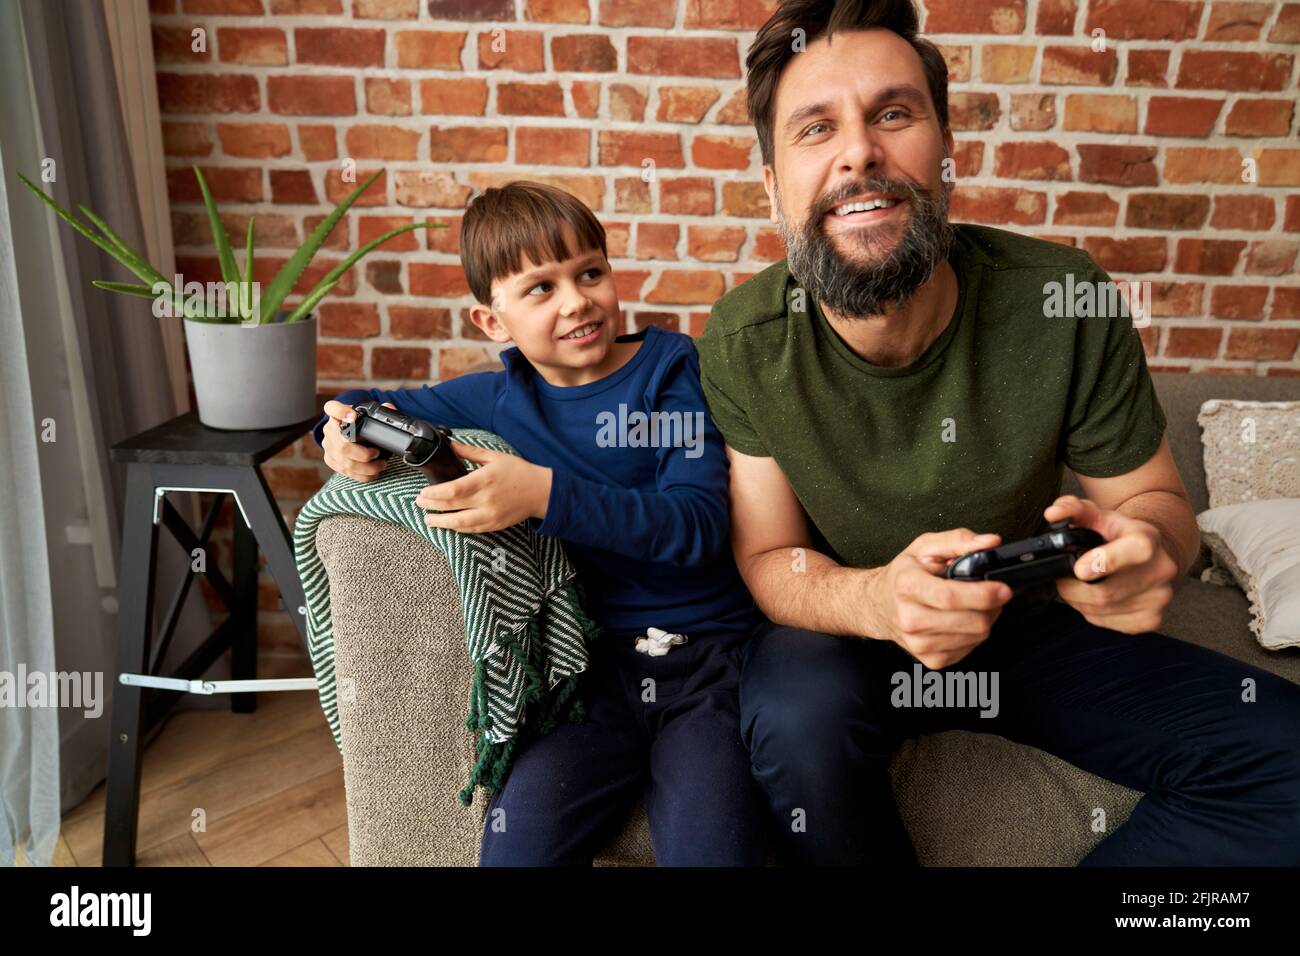 Father having fun playing video games with his son Stock Photo